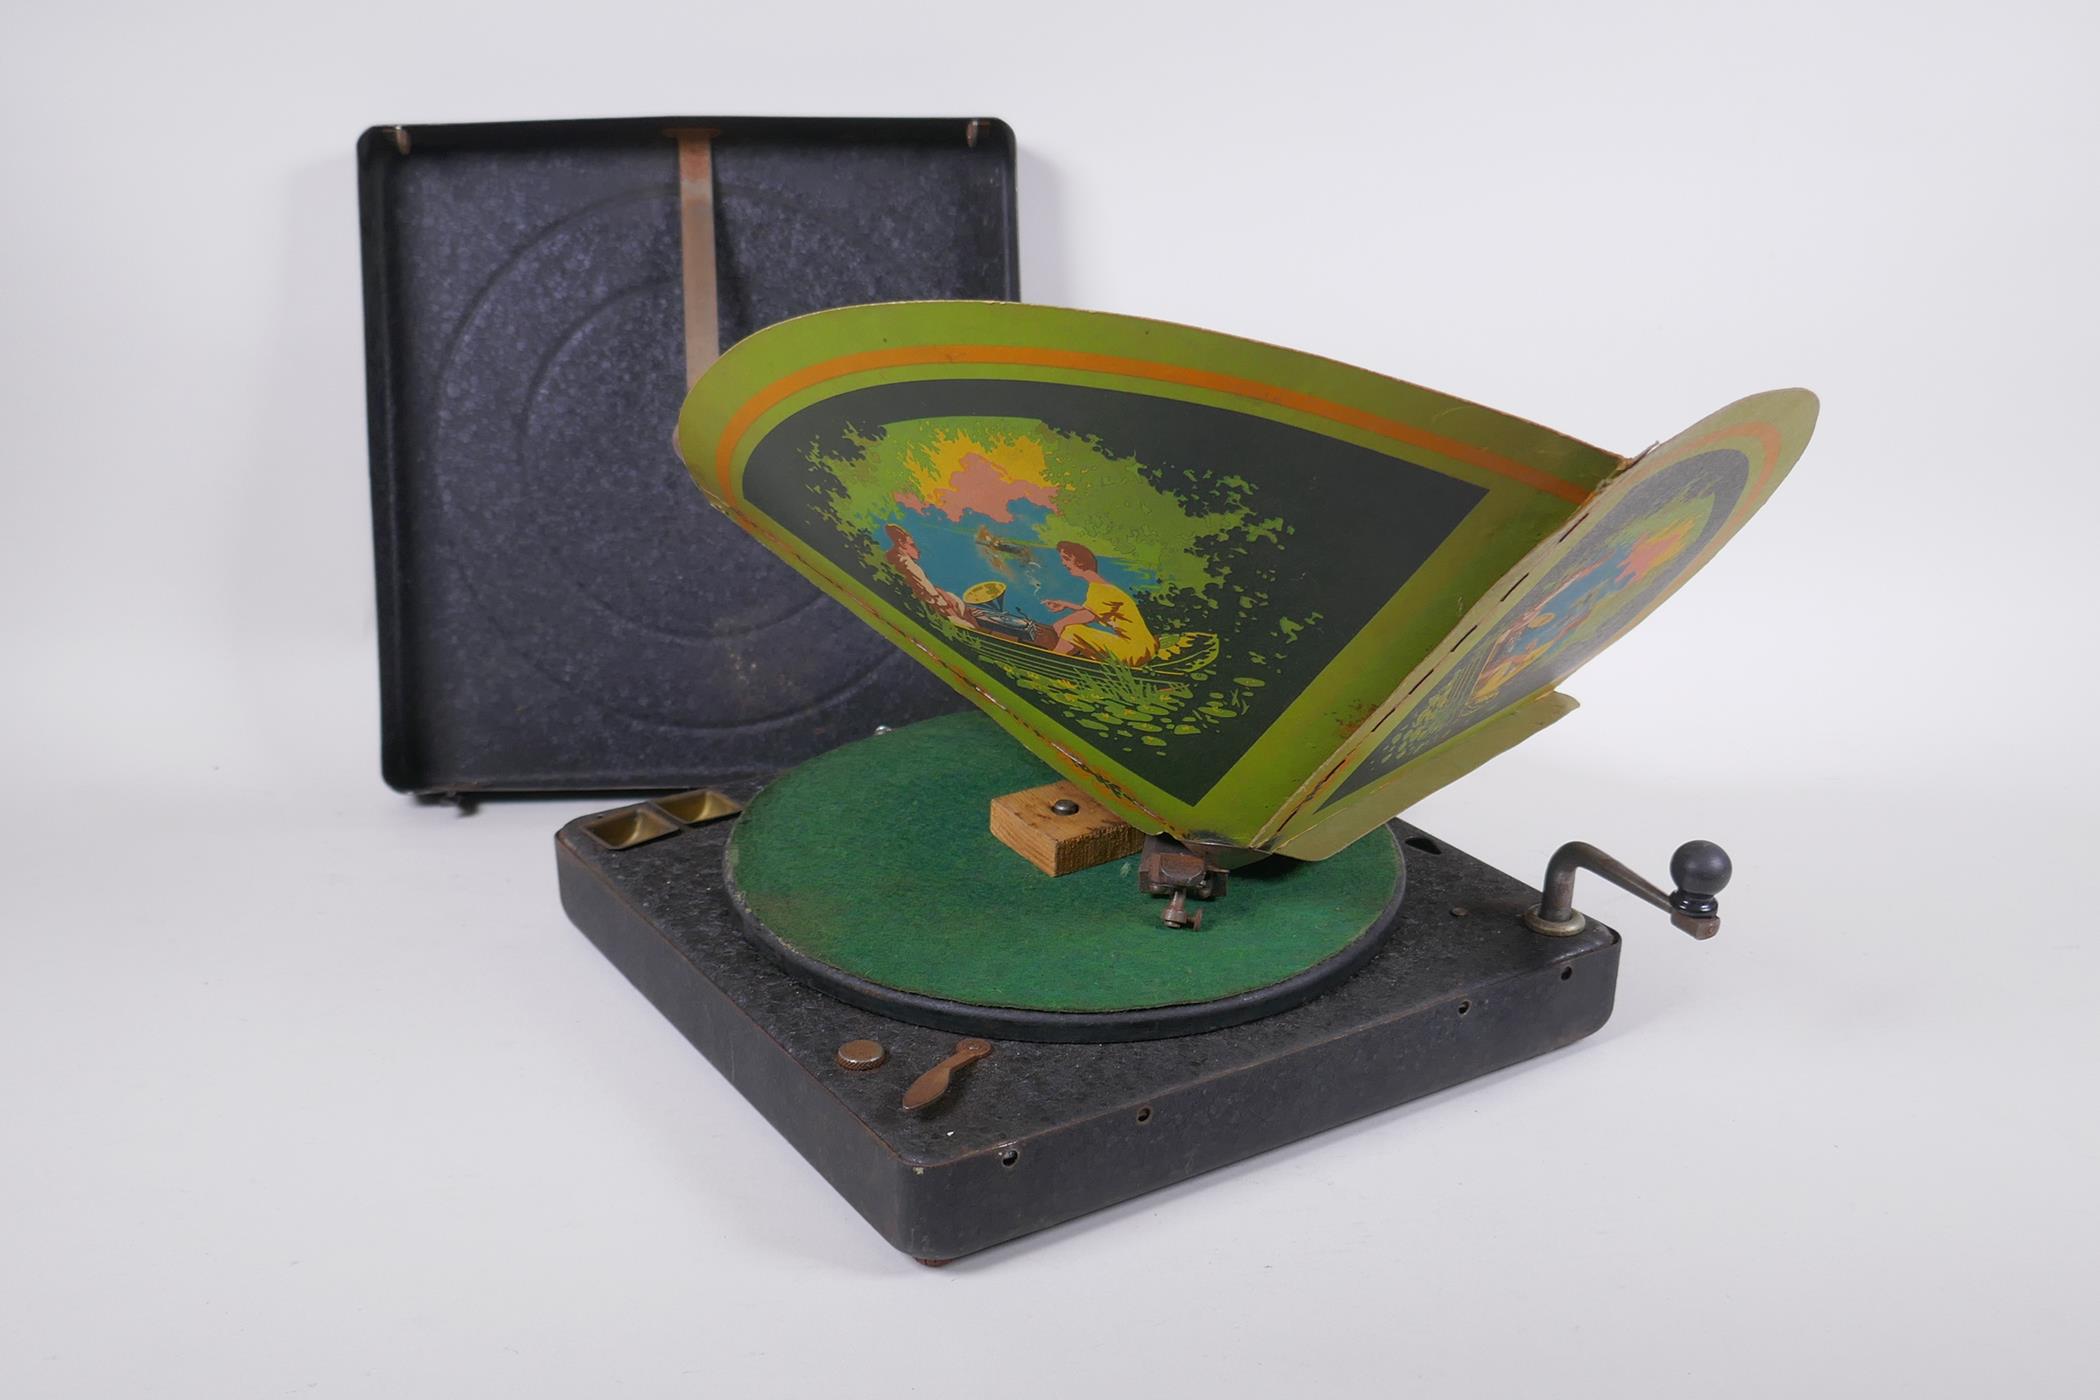 An early 1920s  Polly Portable type gramophone player with fold out loud speaker, 27 x 27 x 6cm